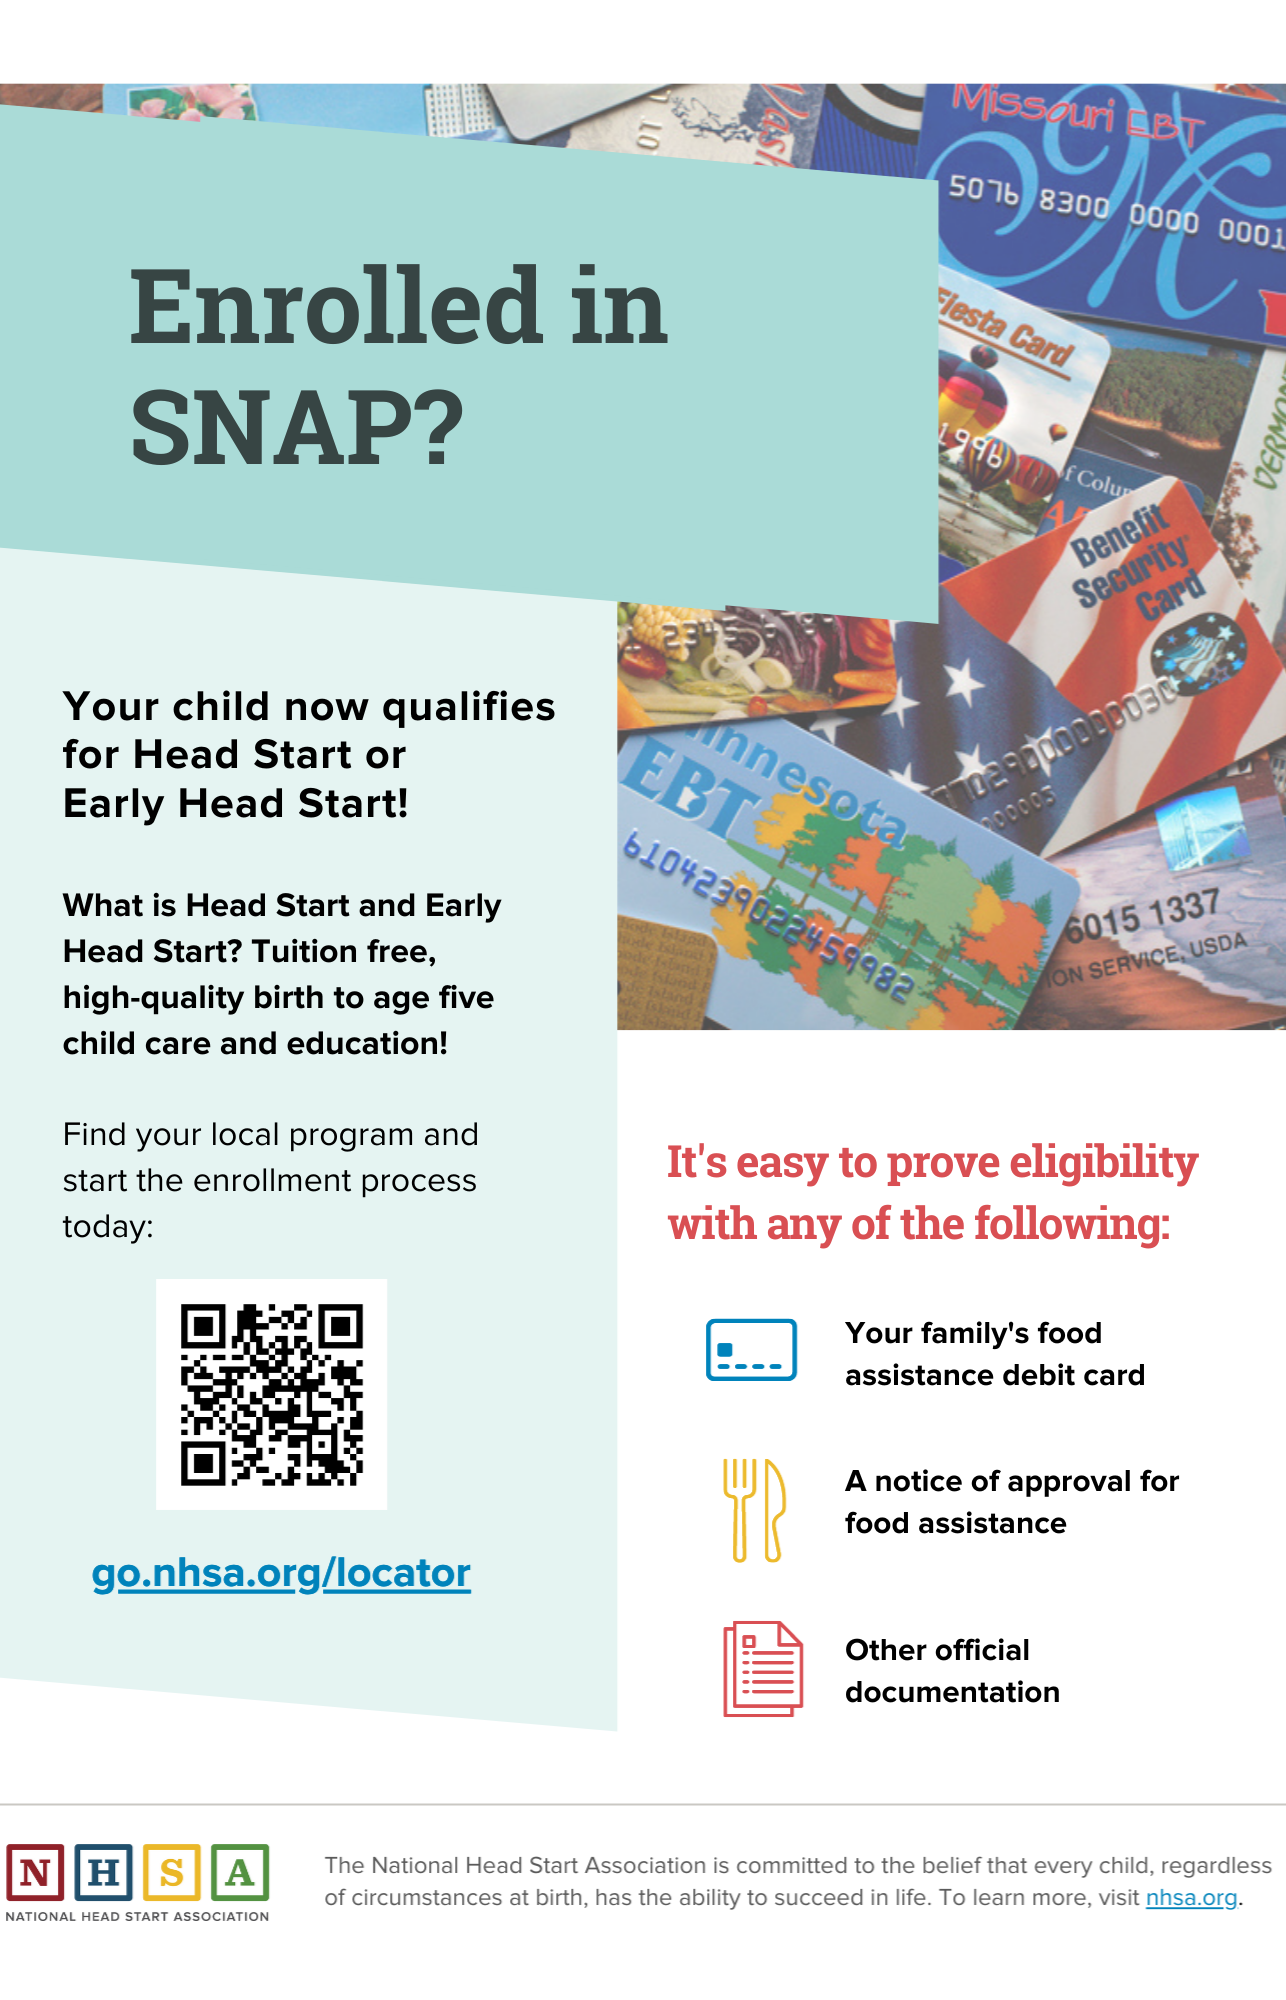 SNAP recipients are eligible for Head Start